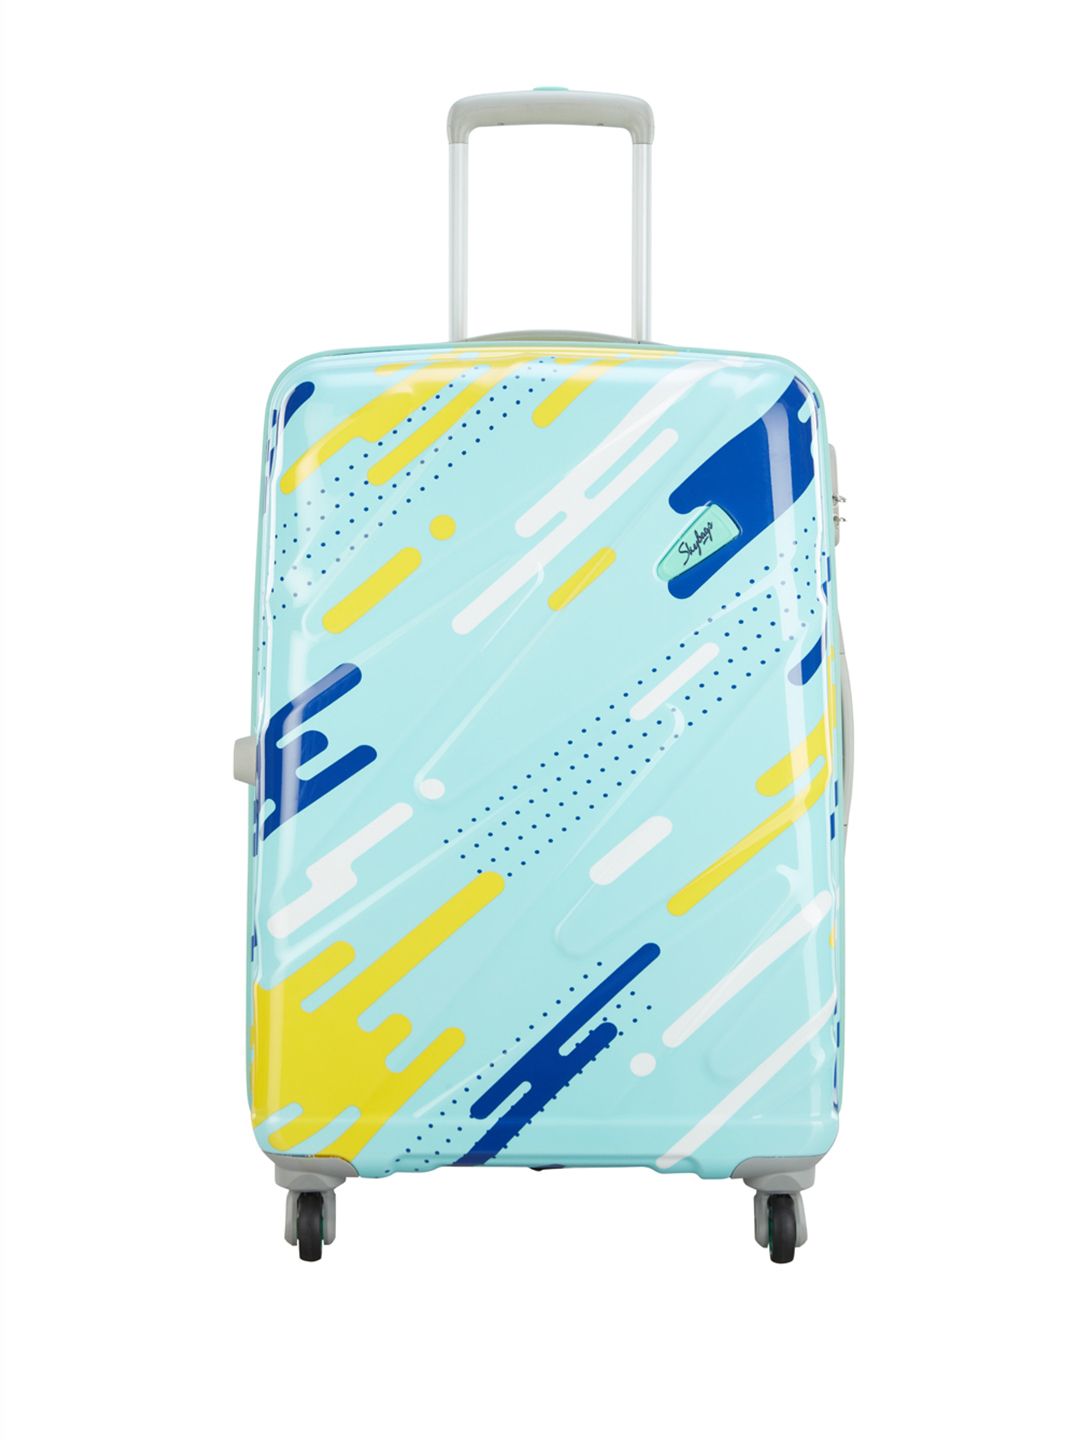 Skybags Blue Shooting Star 69 360 Medium Trolley Suitcase - Price History